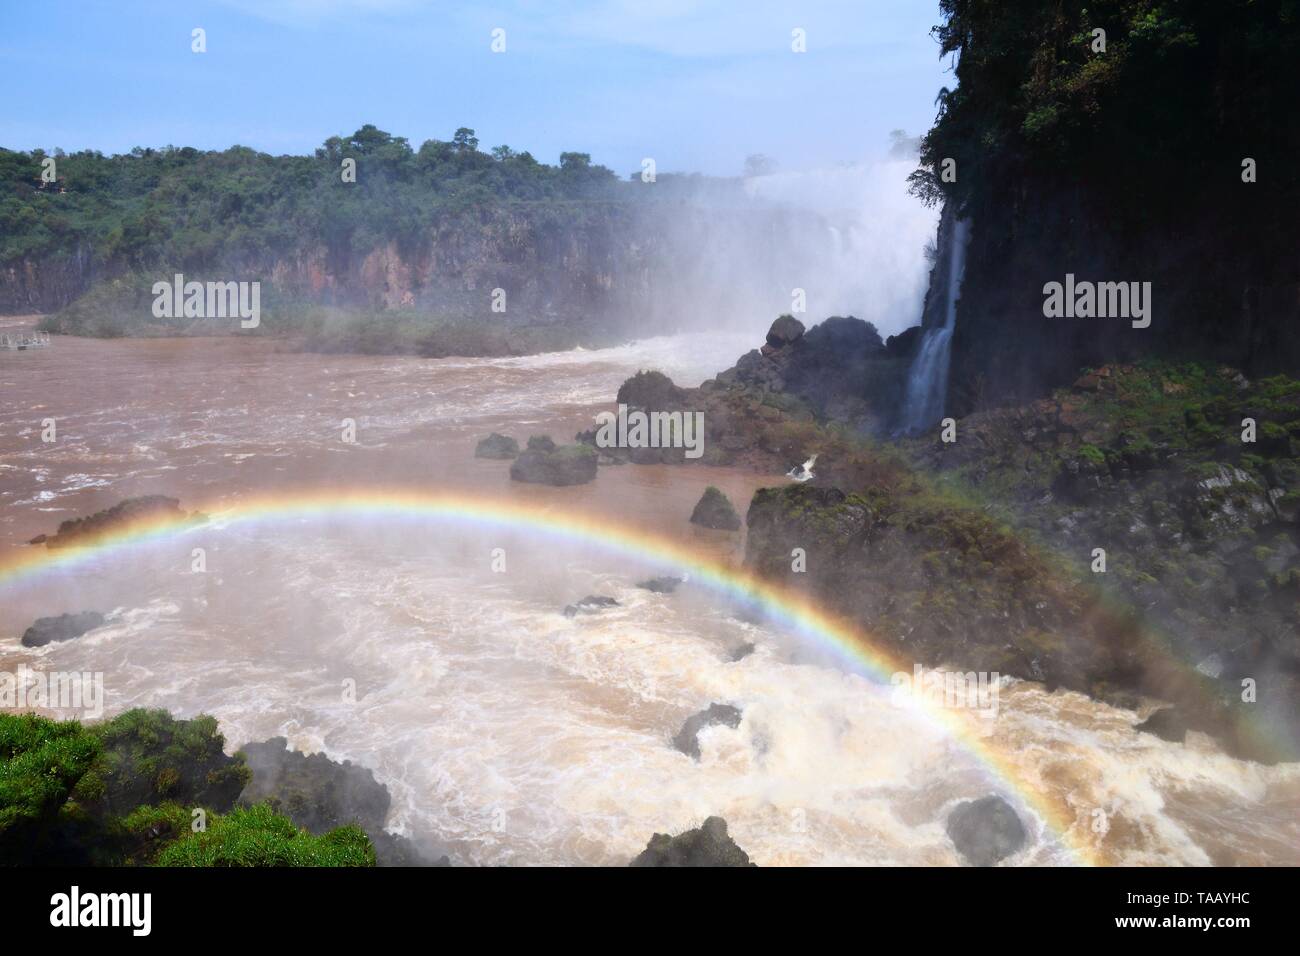 Iguazu Falls - waterfalls on Brazil and Argentina border. National park and UNESCO World Heritage Site. Seen from Argentinian side. Stock Photo